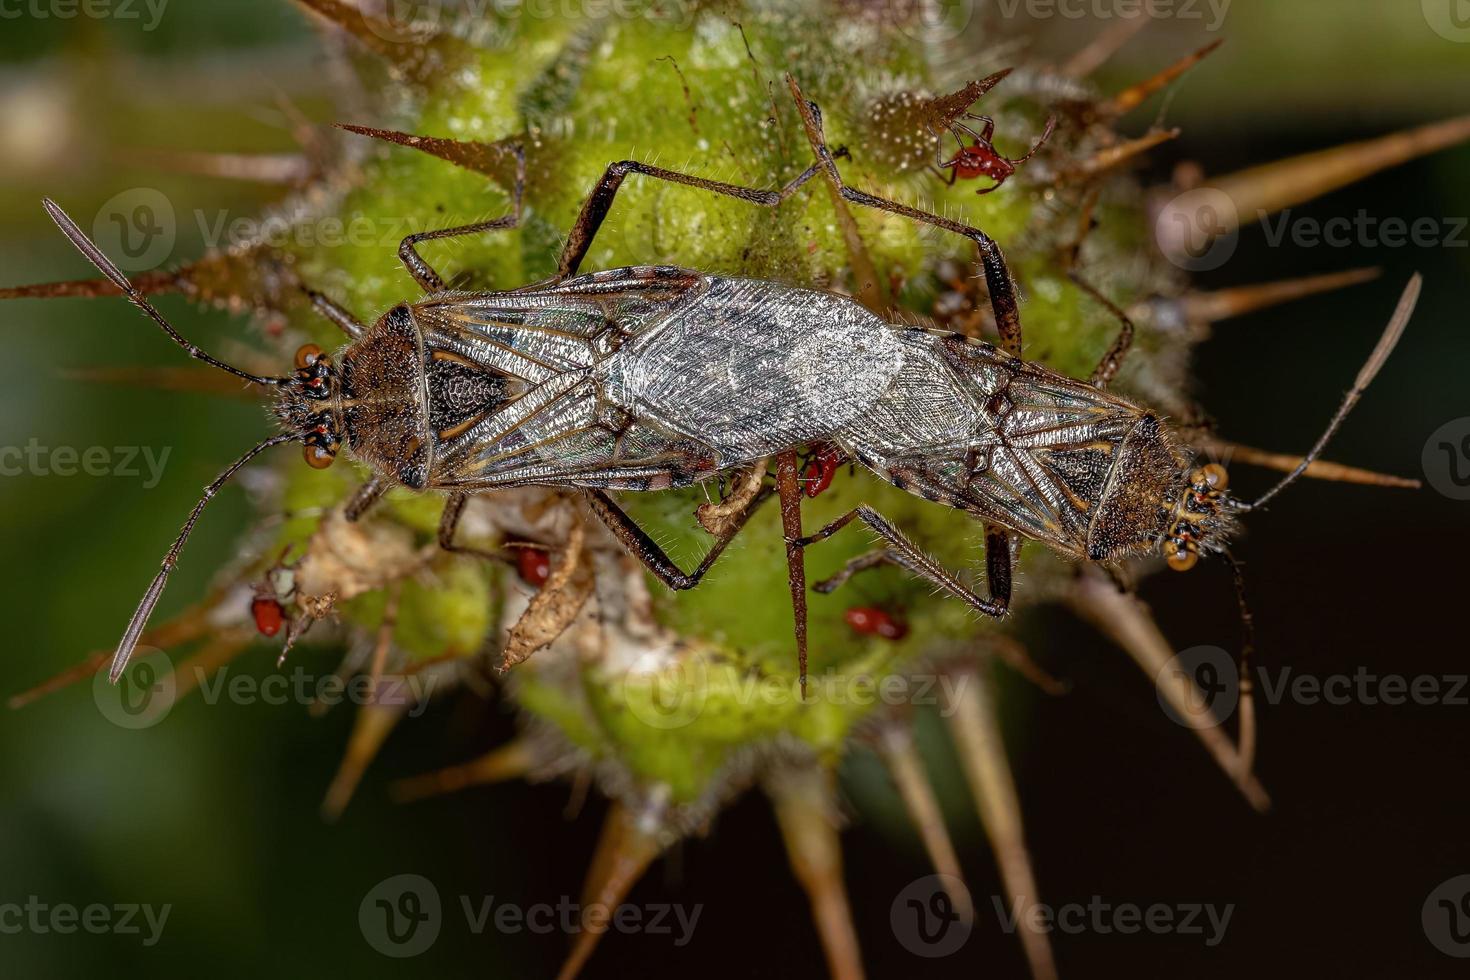 Adult Scentless Plant Bugs photo